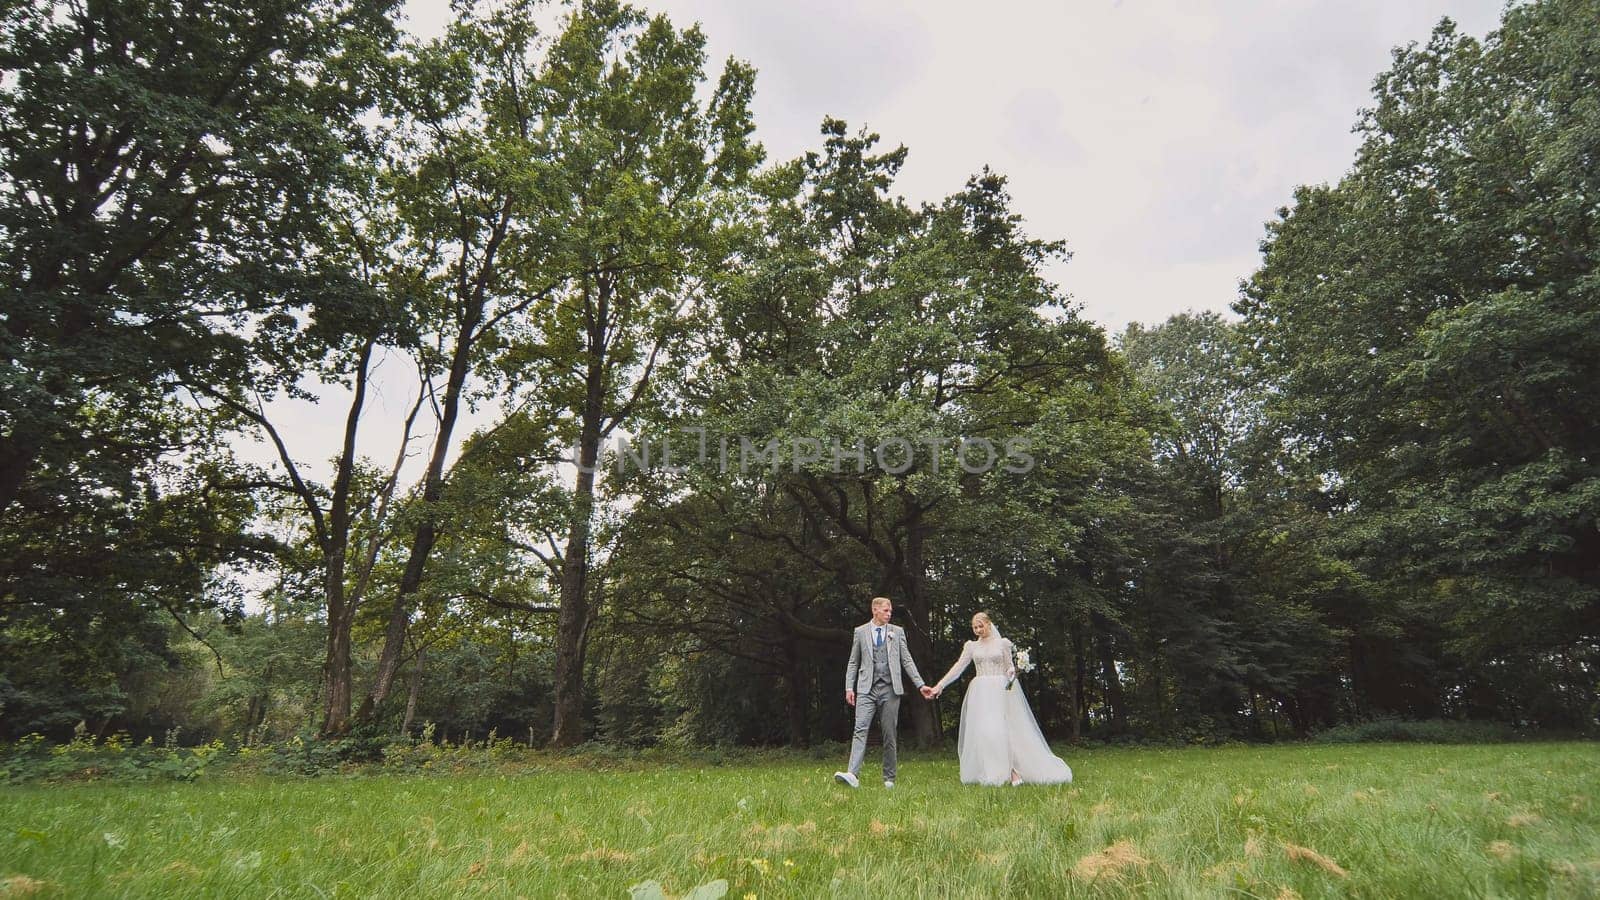 The bride and groom walk against a backdrop of dense trees